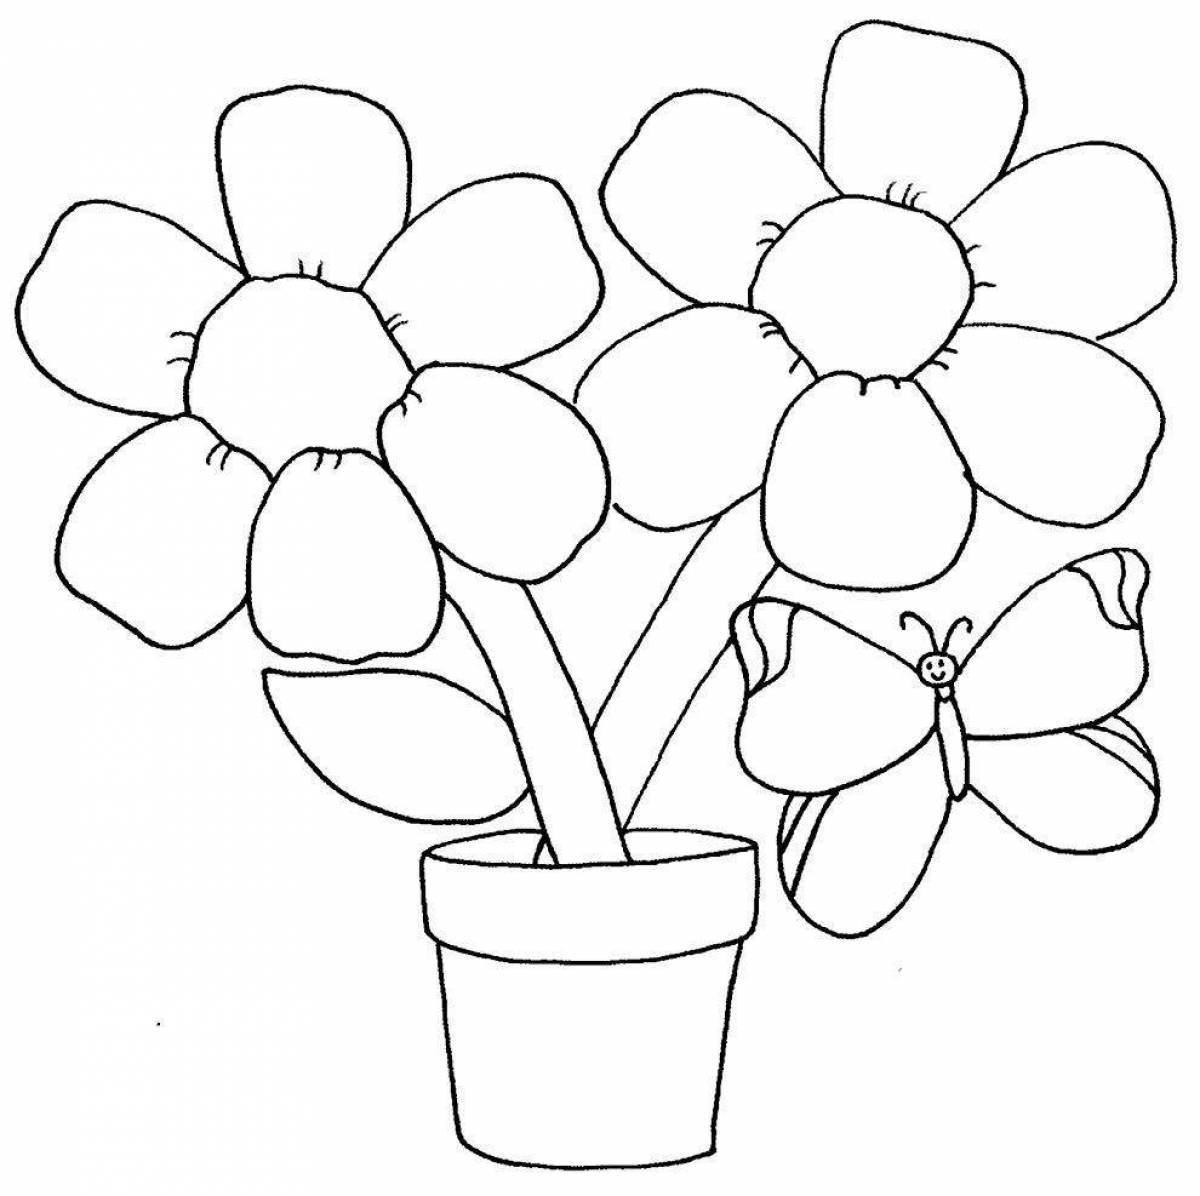 Fun coloring book for indoor plants for 3-4 year olds